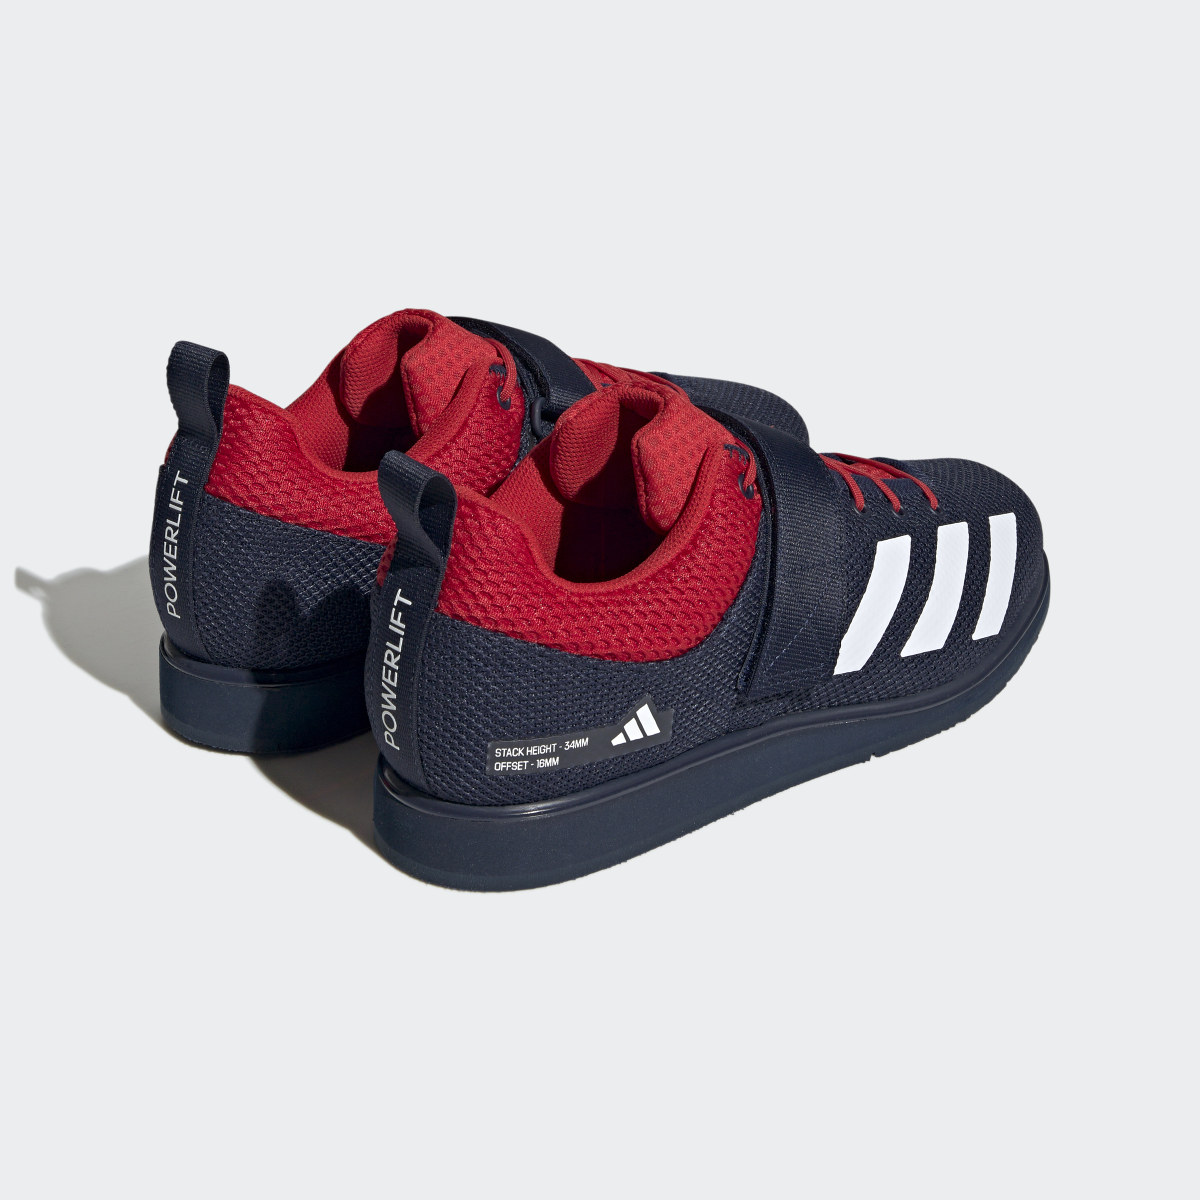 Adidas Powerlift 5 Weightlifting Shoes. 6